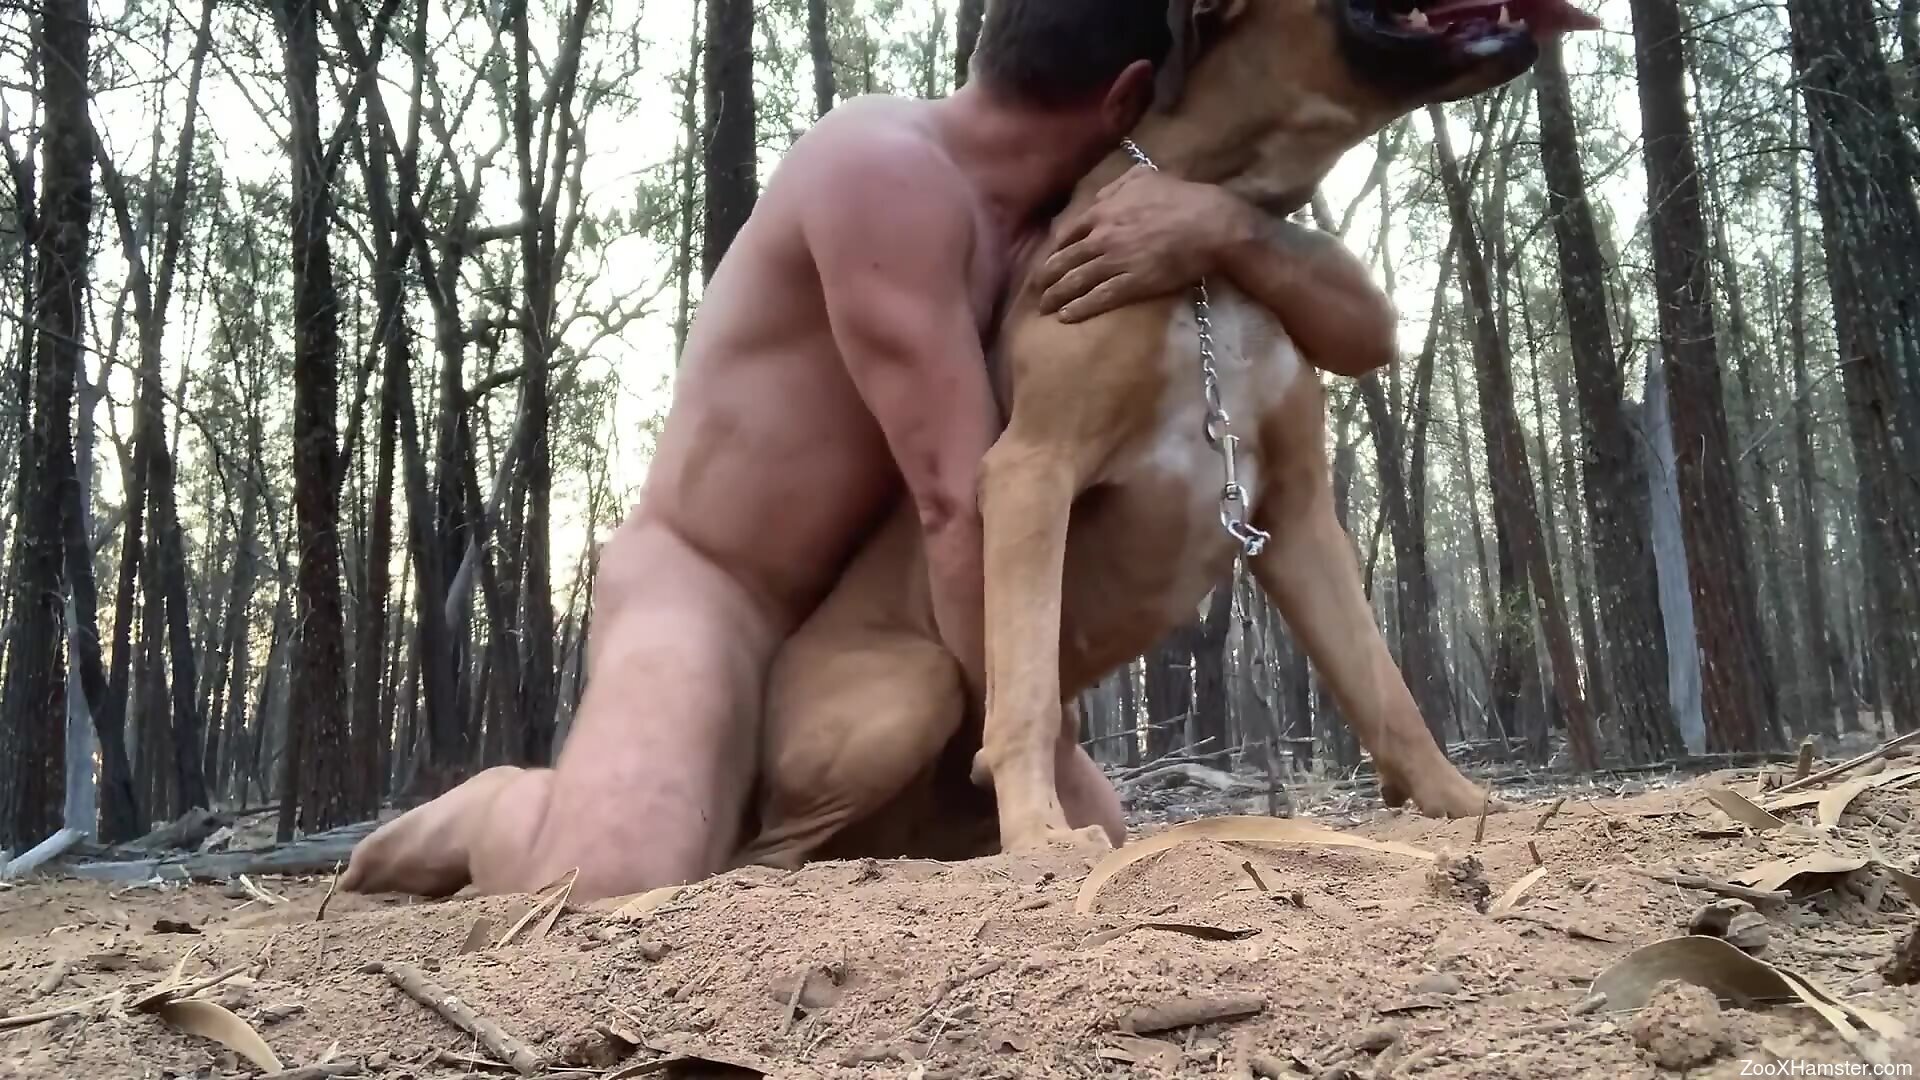 Muscular guy fucking a sexy brown beast from behind